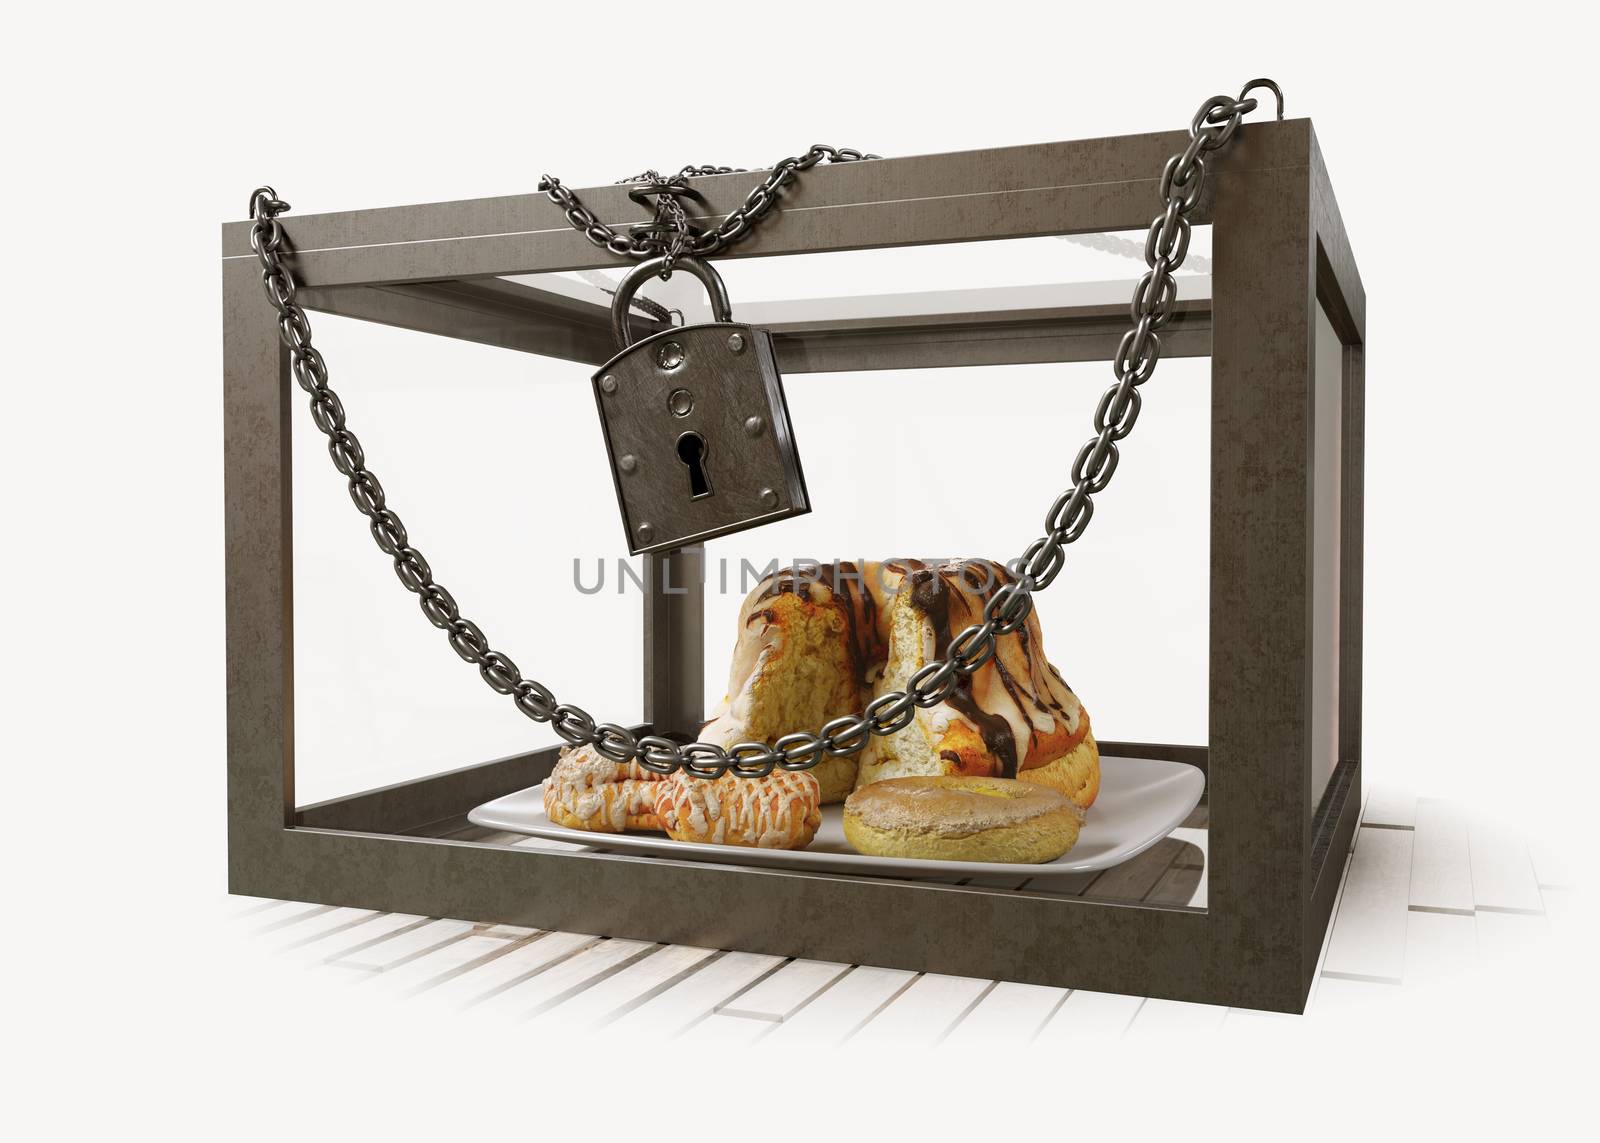 cakes in close metal box with chains diet concept composition photo by denisgo